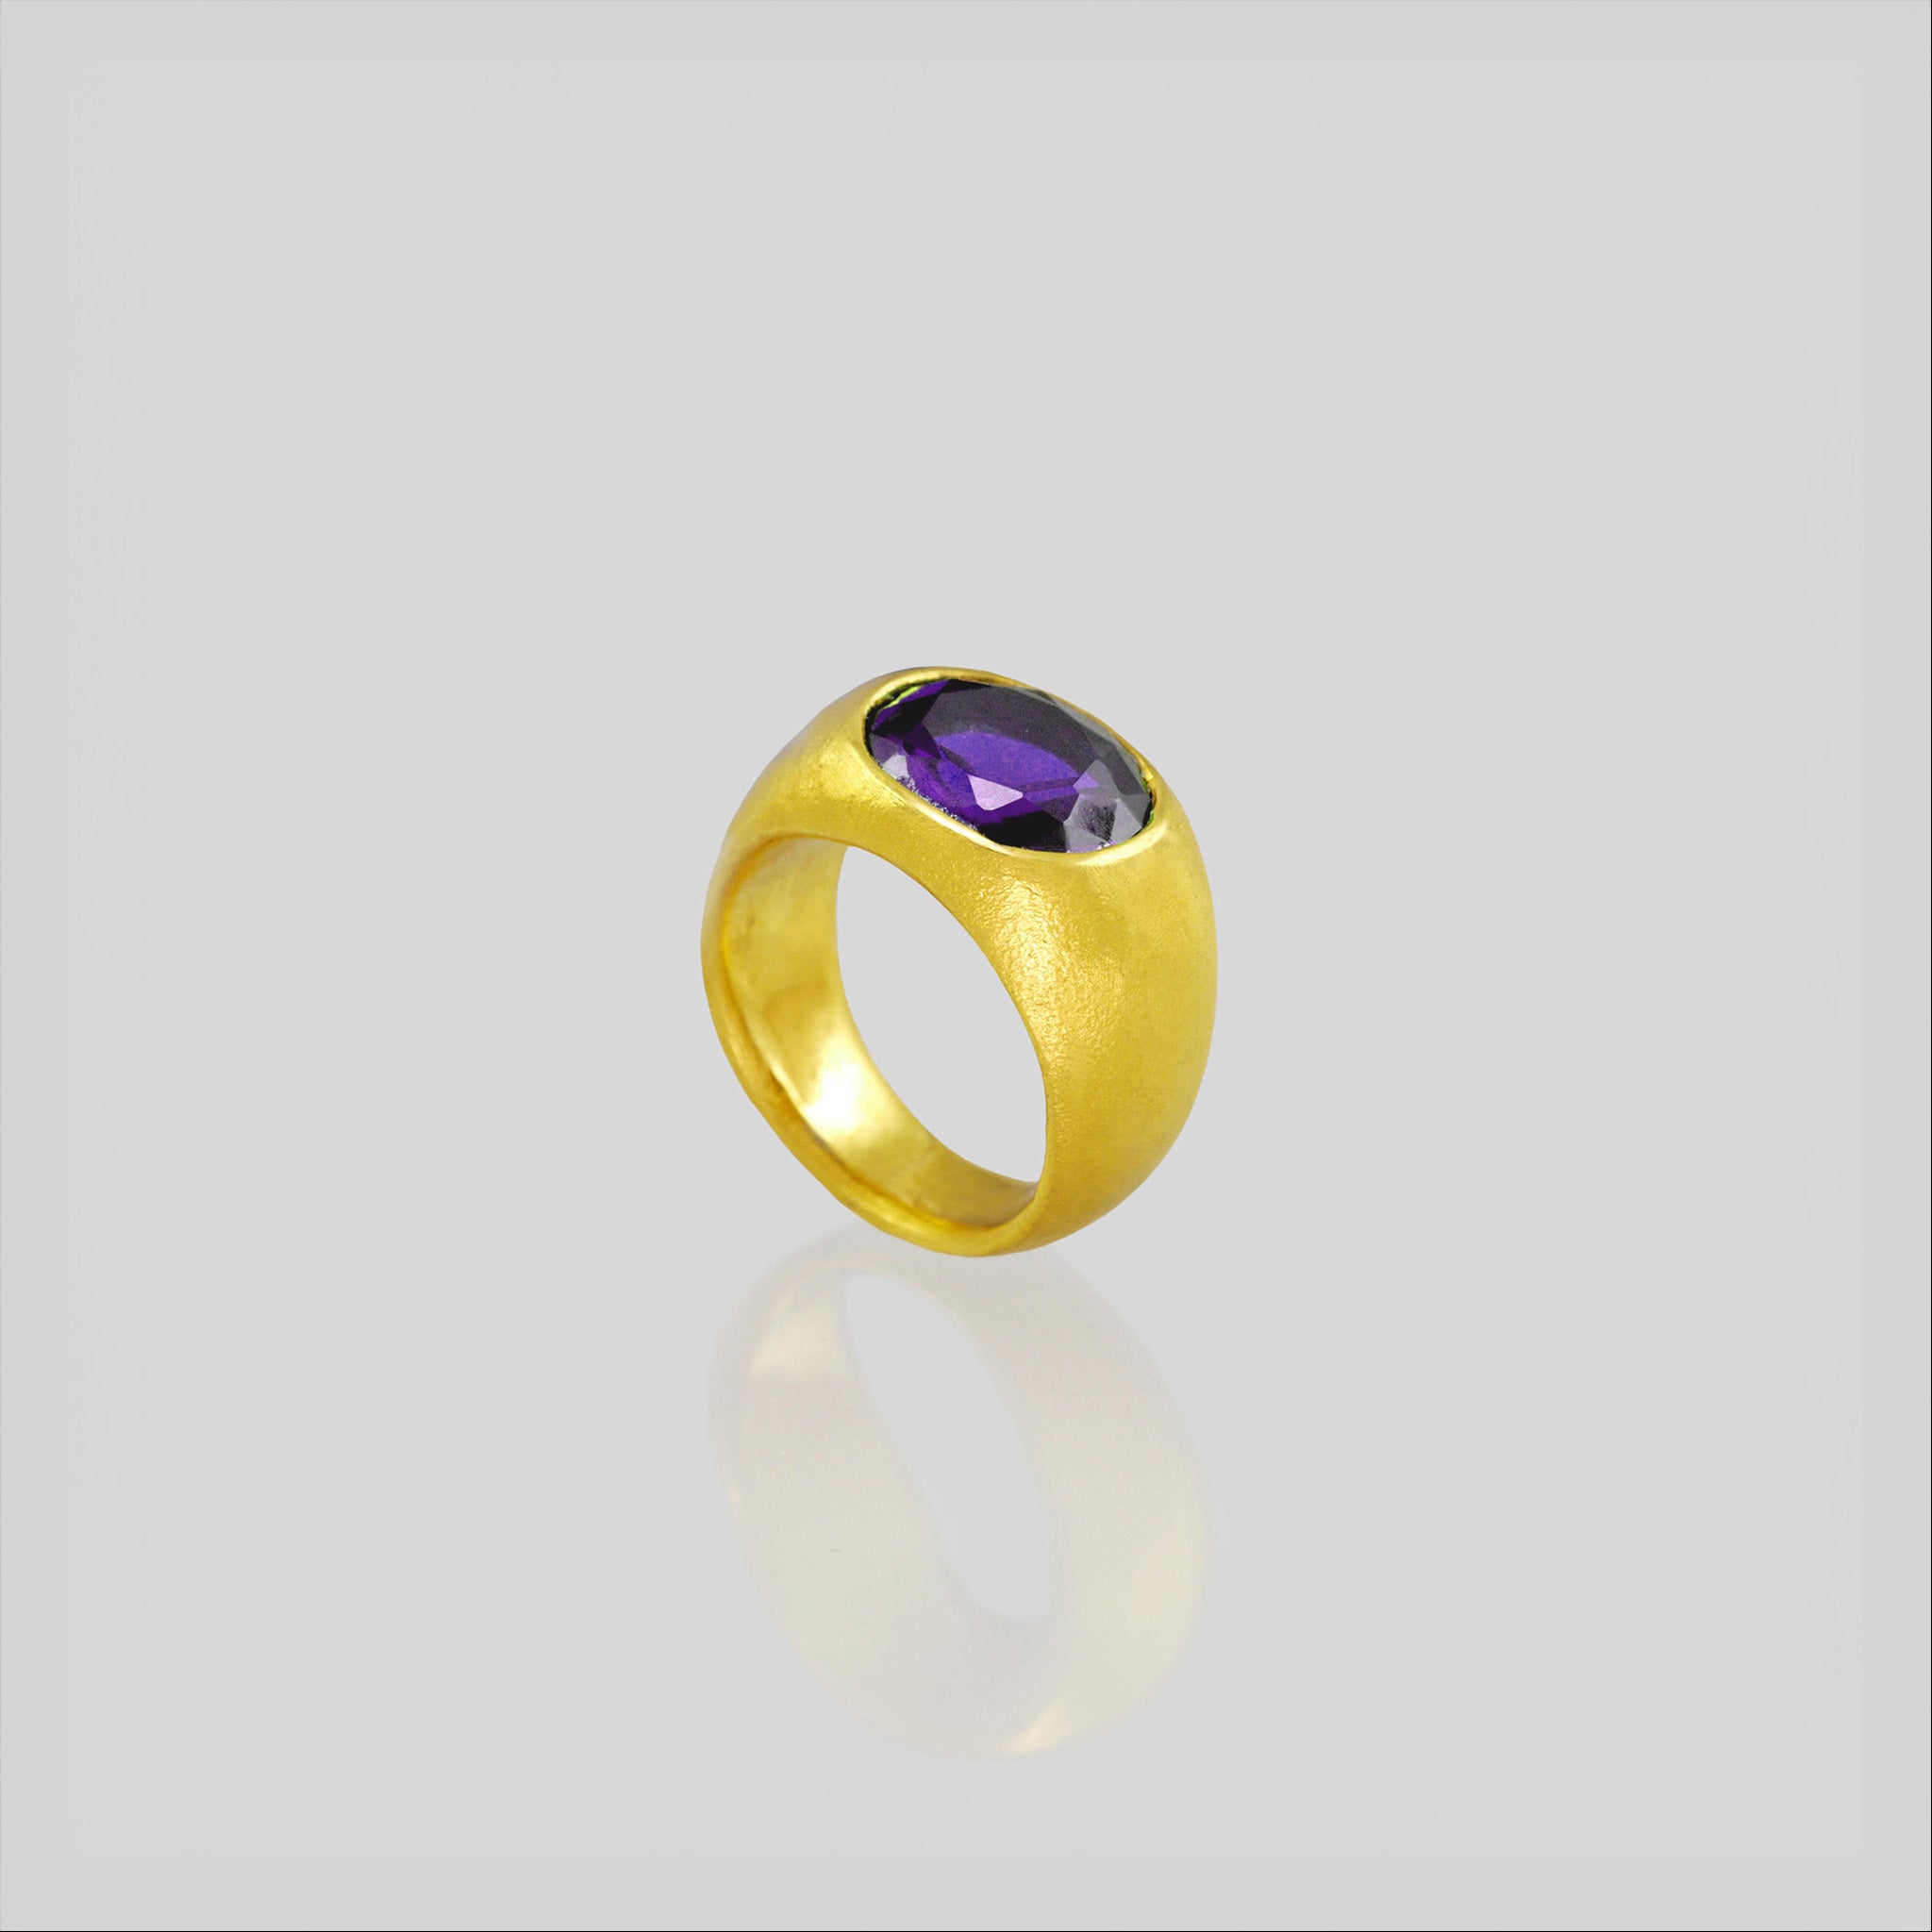 A timeless 18k Gold oval ring adorned with a captivating amethyst gemstone. This classic piece exudes traditional elegance and is beloved for its enduring appeal.